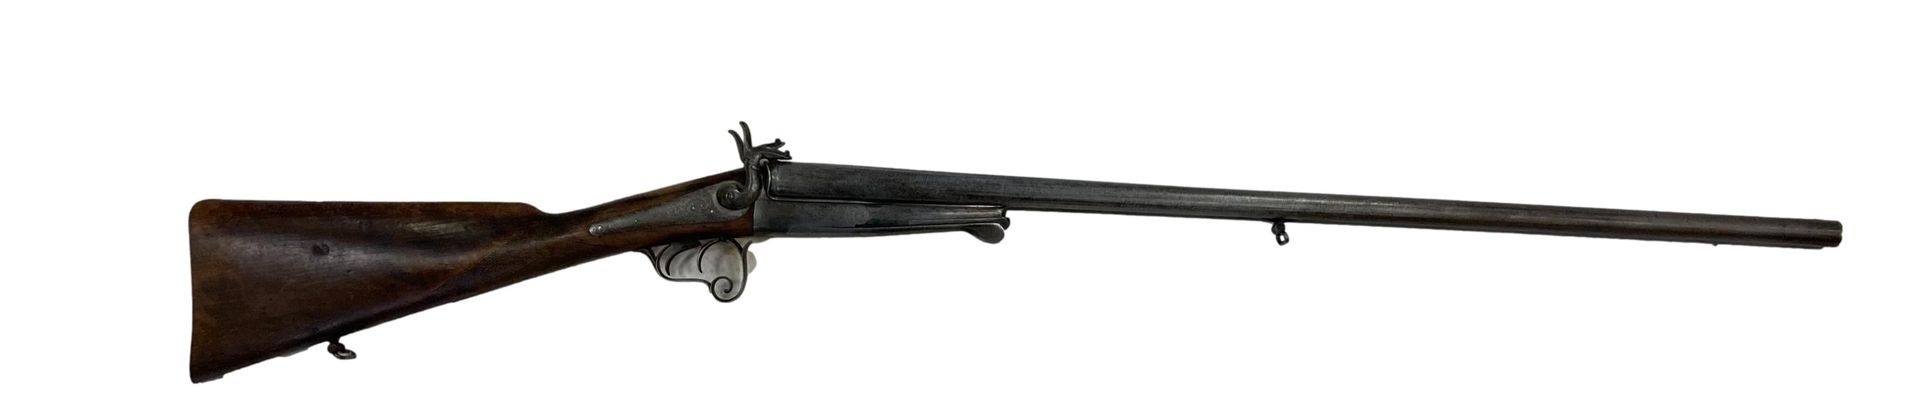 Null Rifle stéphanois with external hammers for cartridges with pin.
With two ju&hellip;